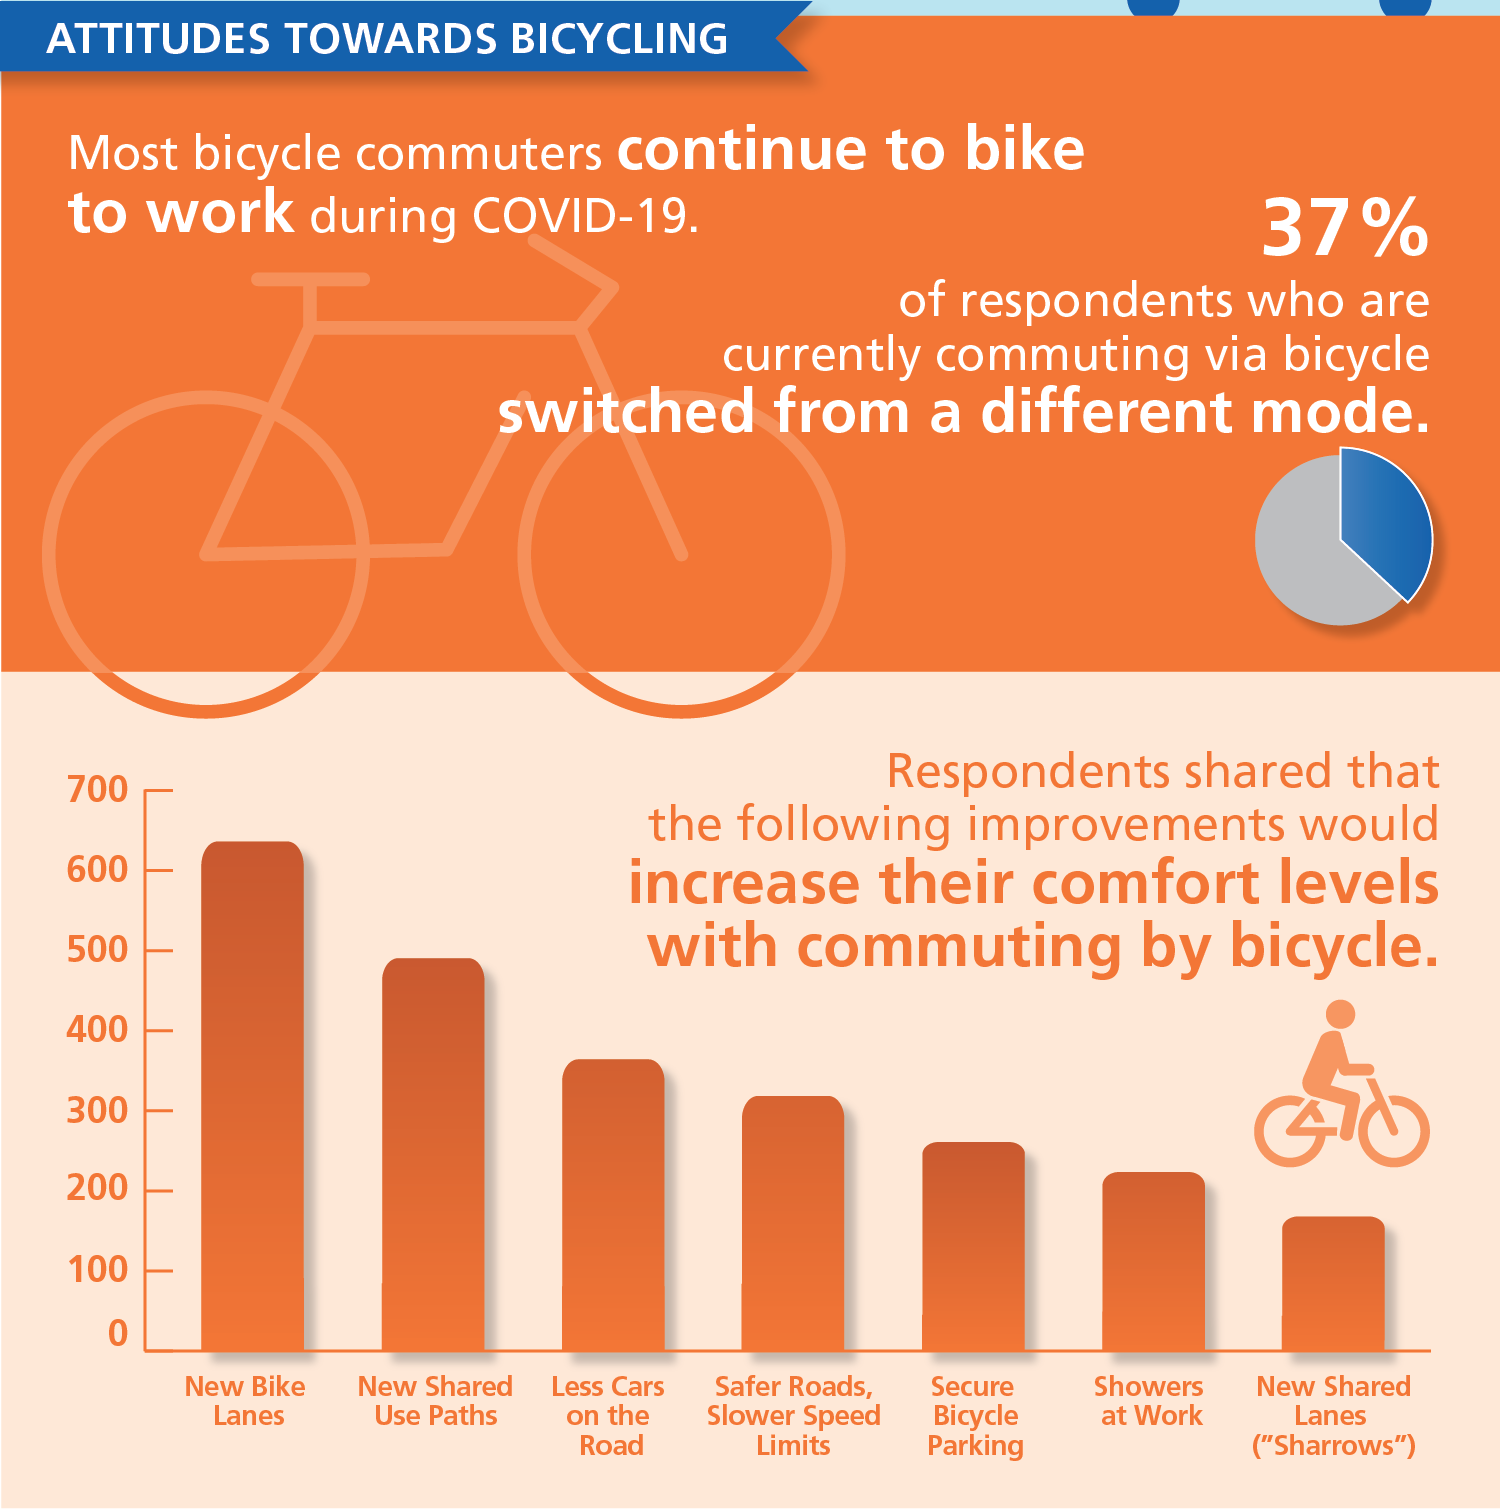 Most bicycle commuters continue to bike to work during COVID-19. 37 percent of respondents who are commuting during COVID-19 via bicycle switched from a different mode. To improve how they feel about bicycling, respondents prioritized bike infrastructure, such as new bike lanes and shared use paths. Reducing the number of vehicles on the road and lowering speed limits were of next importance.